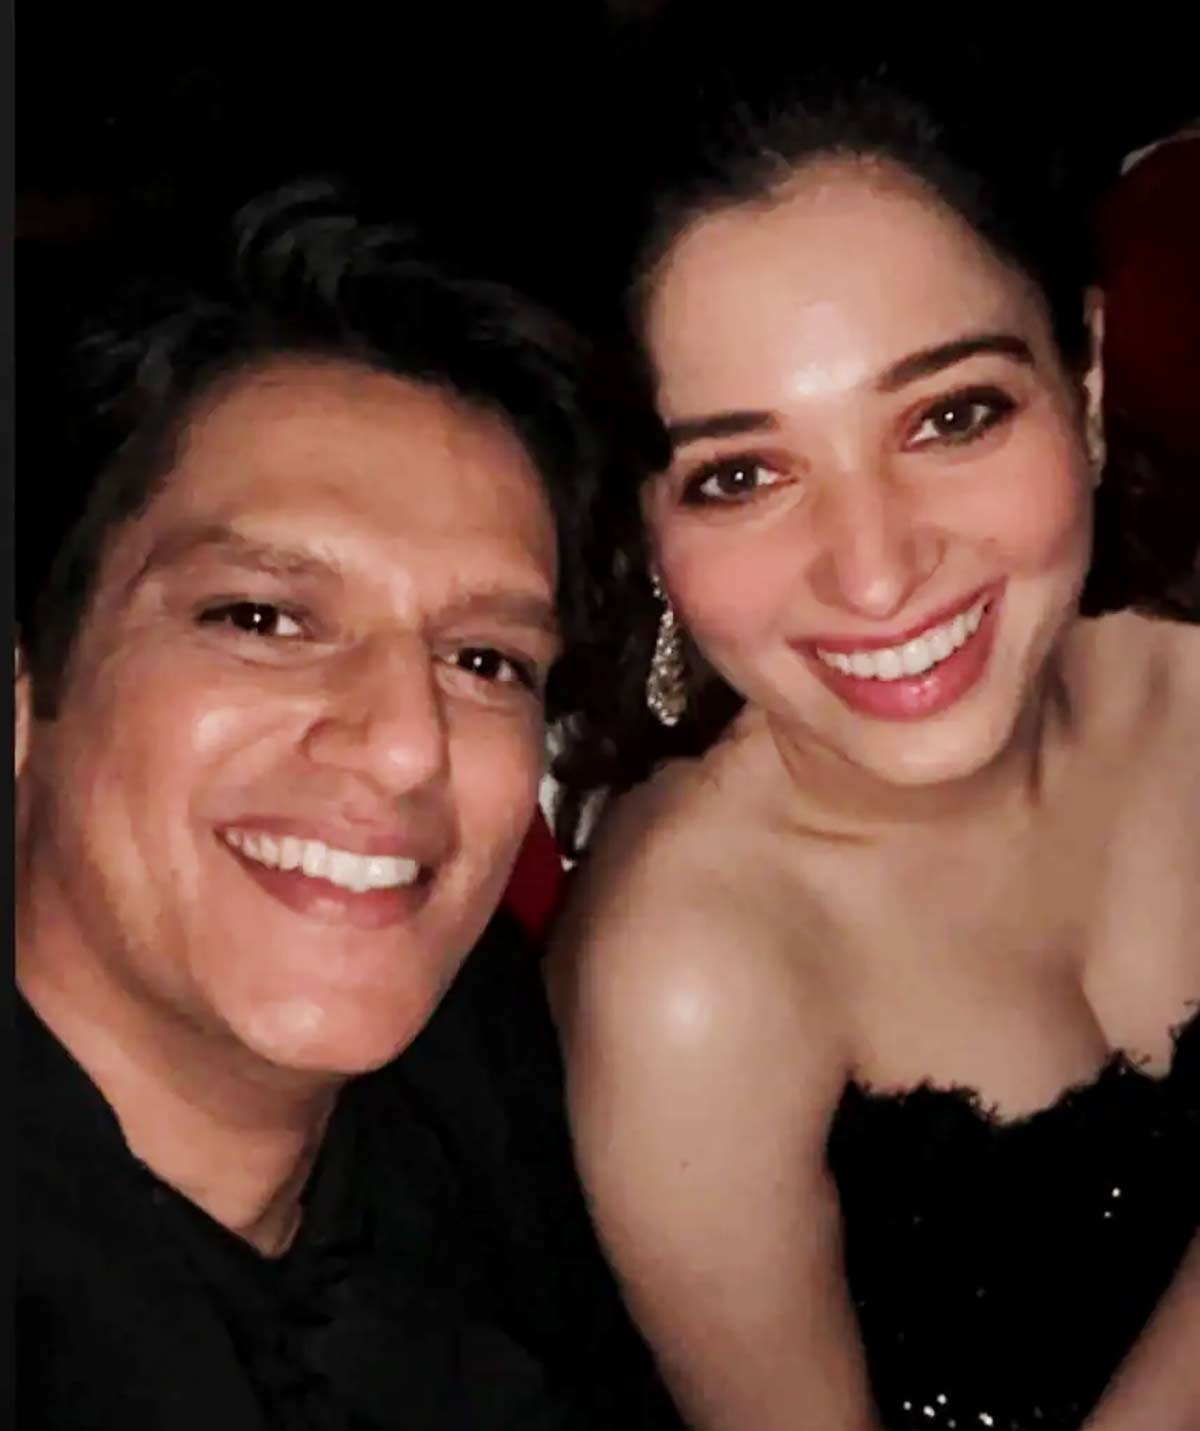 Tamannaah Bhatia partied with dating partner in Goa